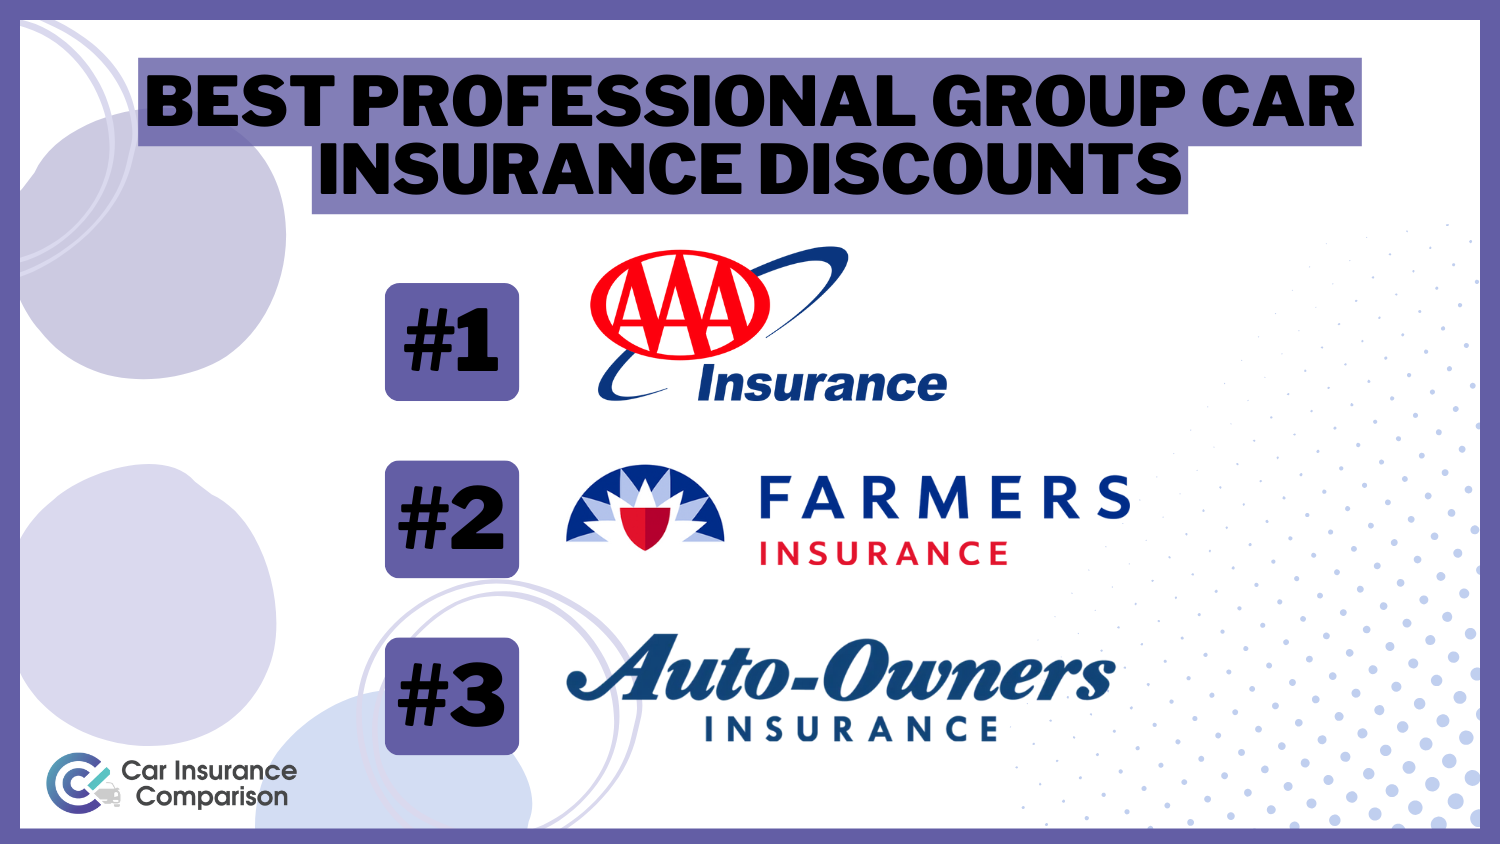 AAA, Geico, Nationwide: Best Professional Group Car Insurance Discounts